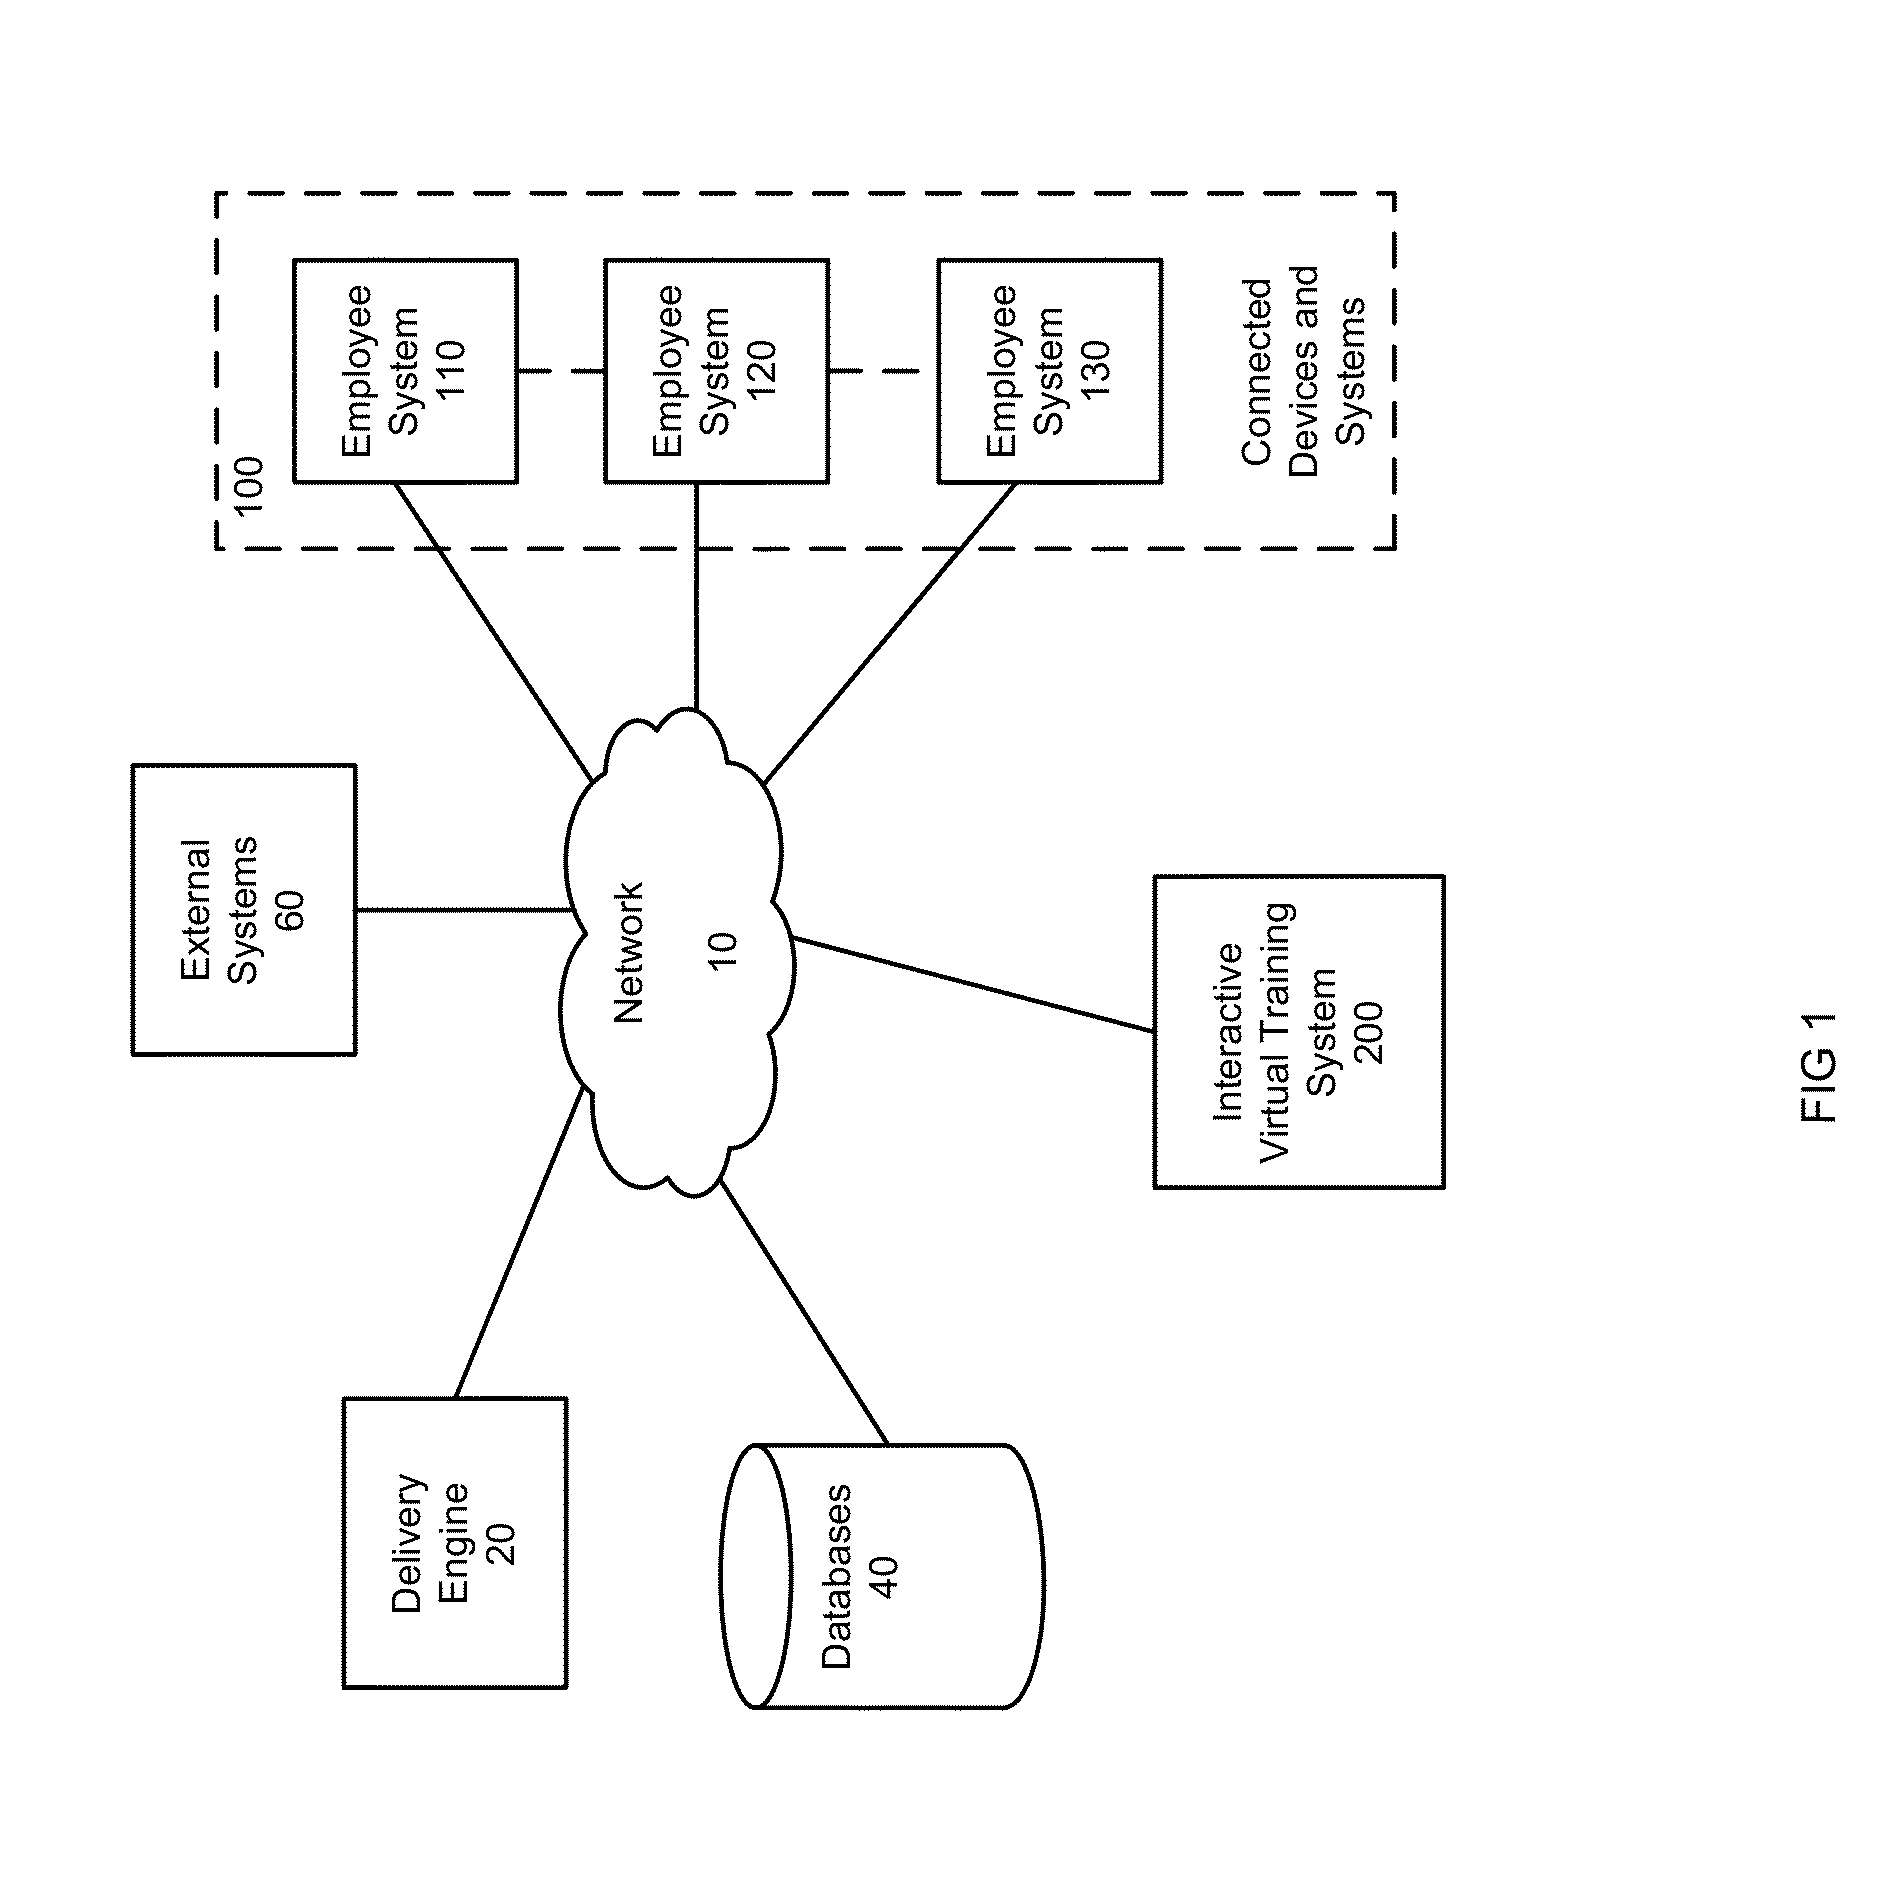 System and Method for Virtual Training Environment